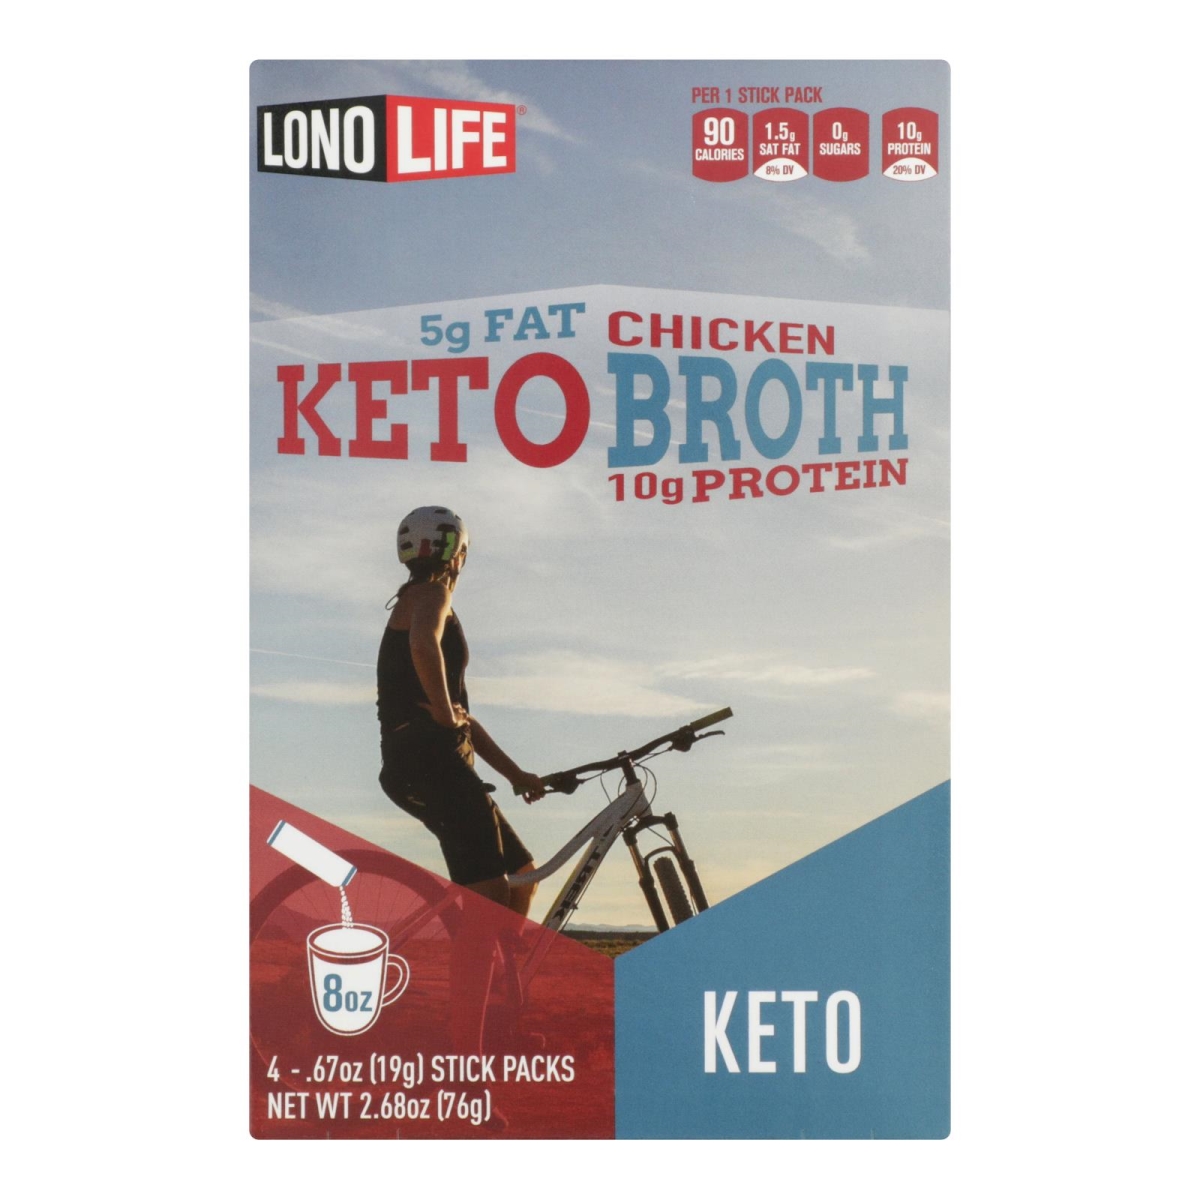 Picture of Lonolife HG2463230 4 &0.67 oz Keto Bone Broth Chicken Protein Pack - Case of 6